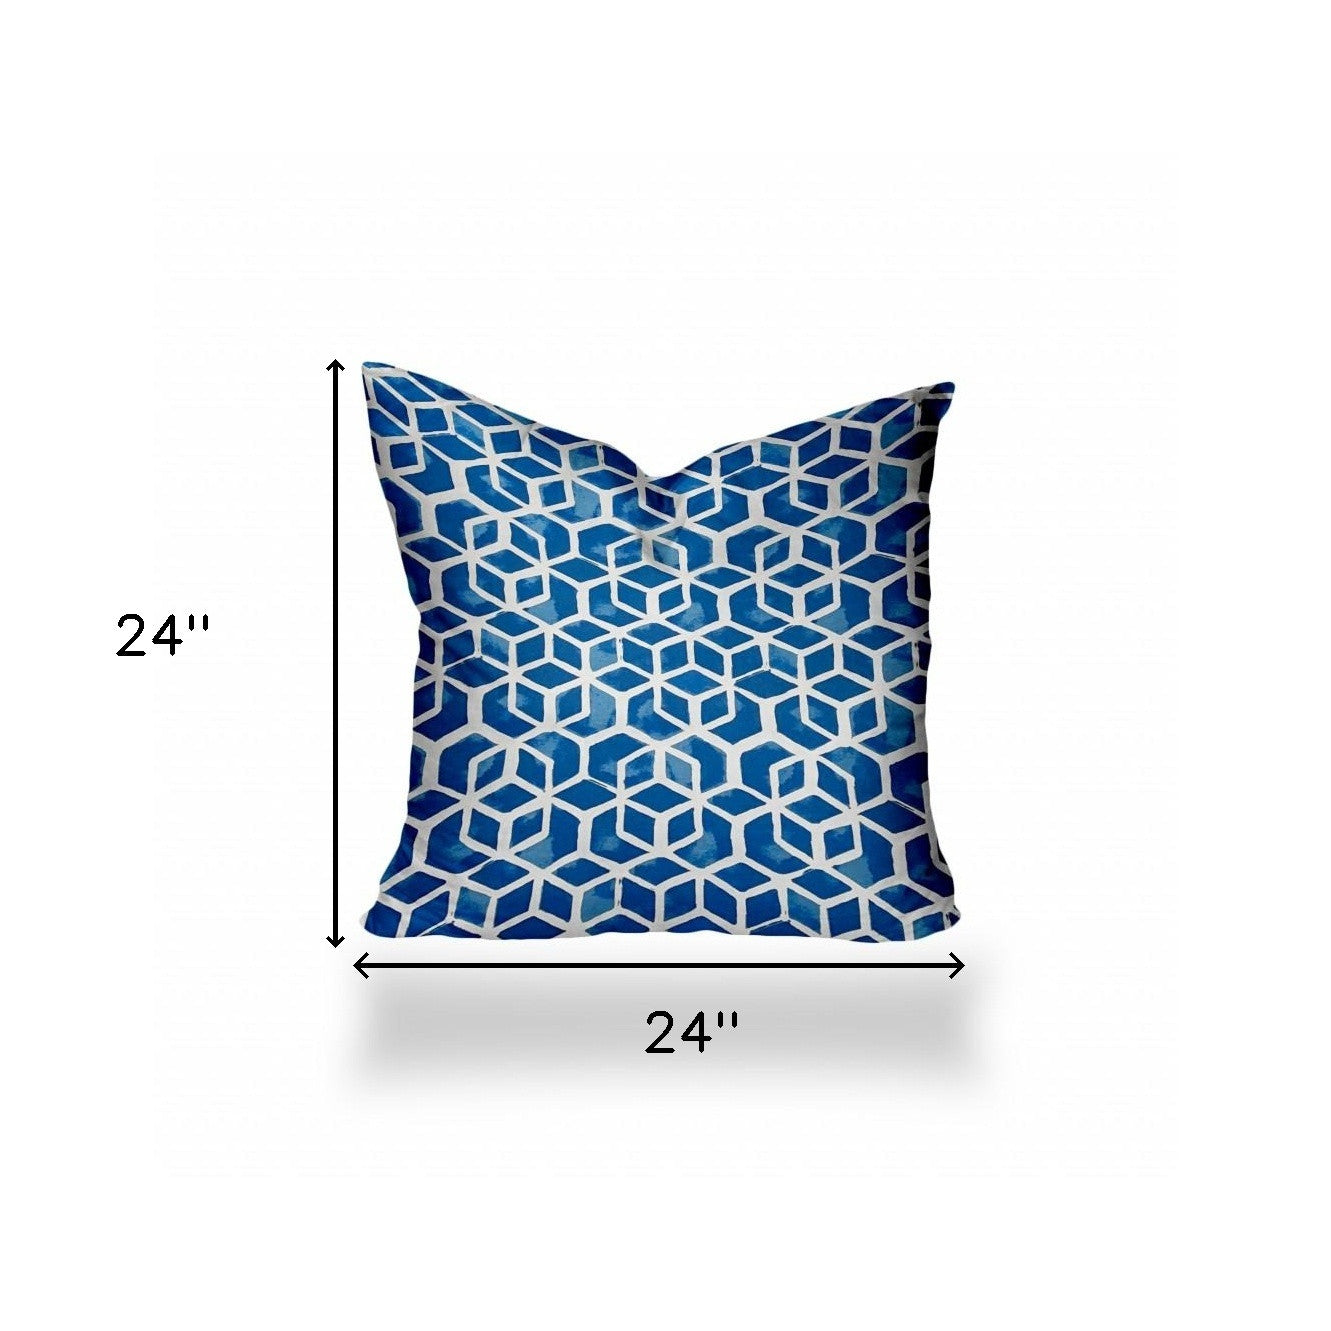 24" X 24" Blue and White Geometric Shapes Indoor Outdoor Throw Pillow Cover